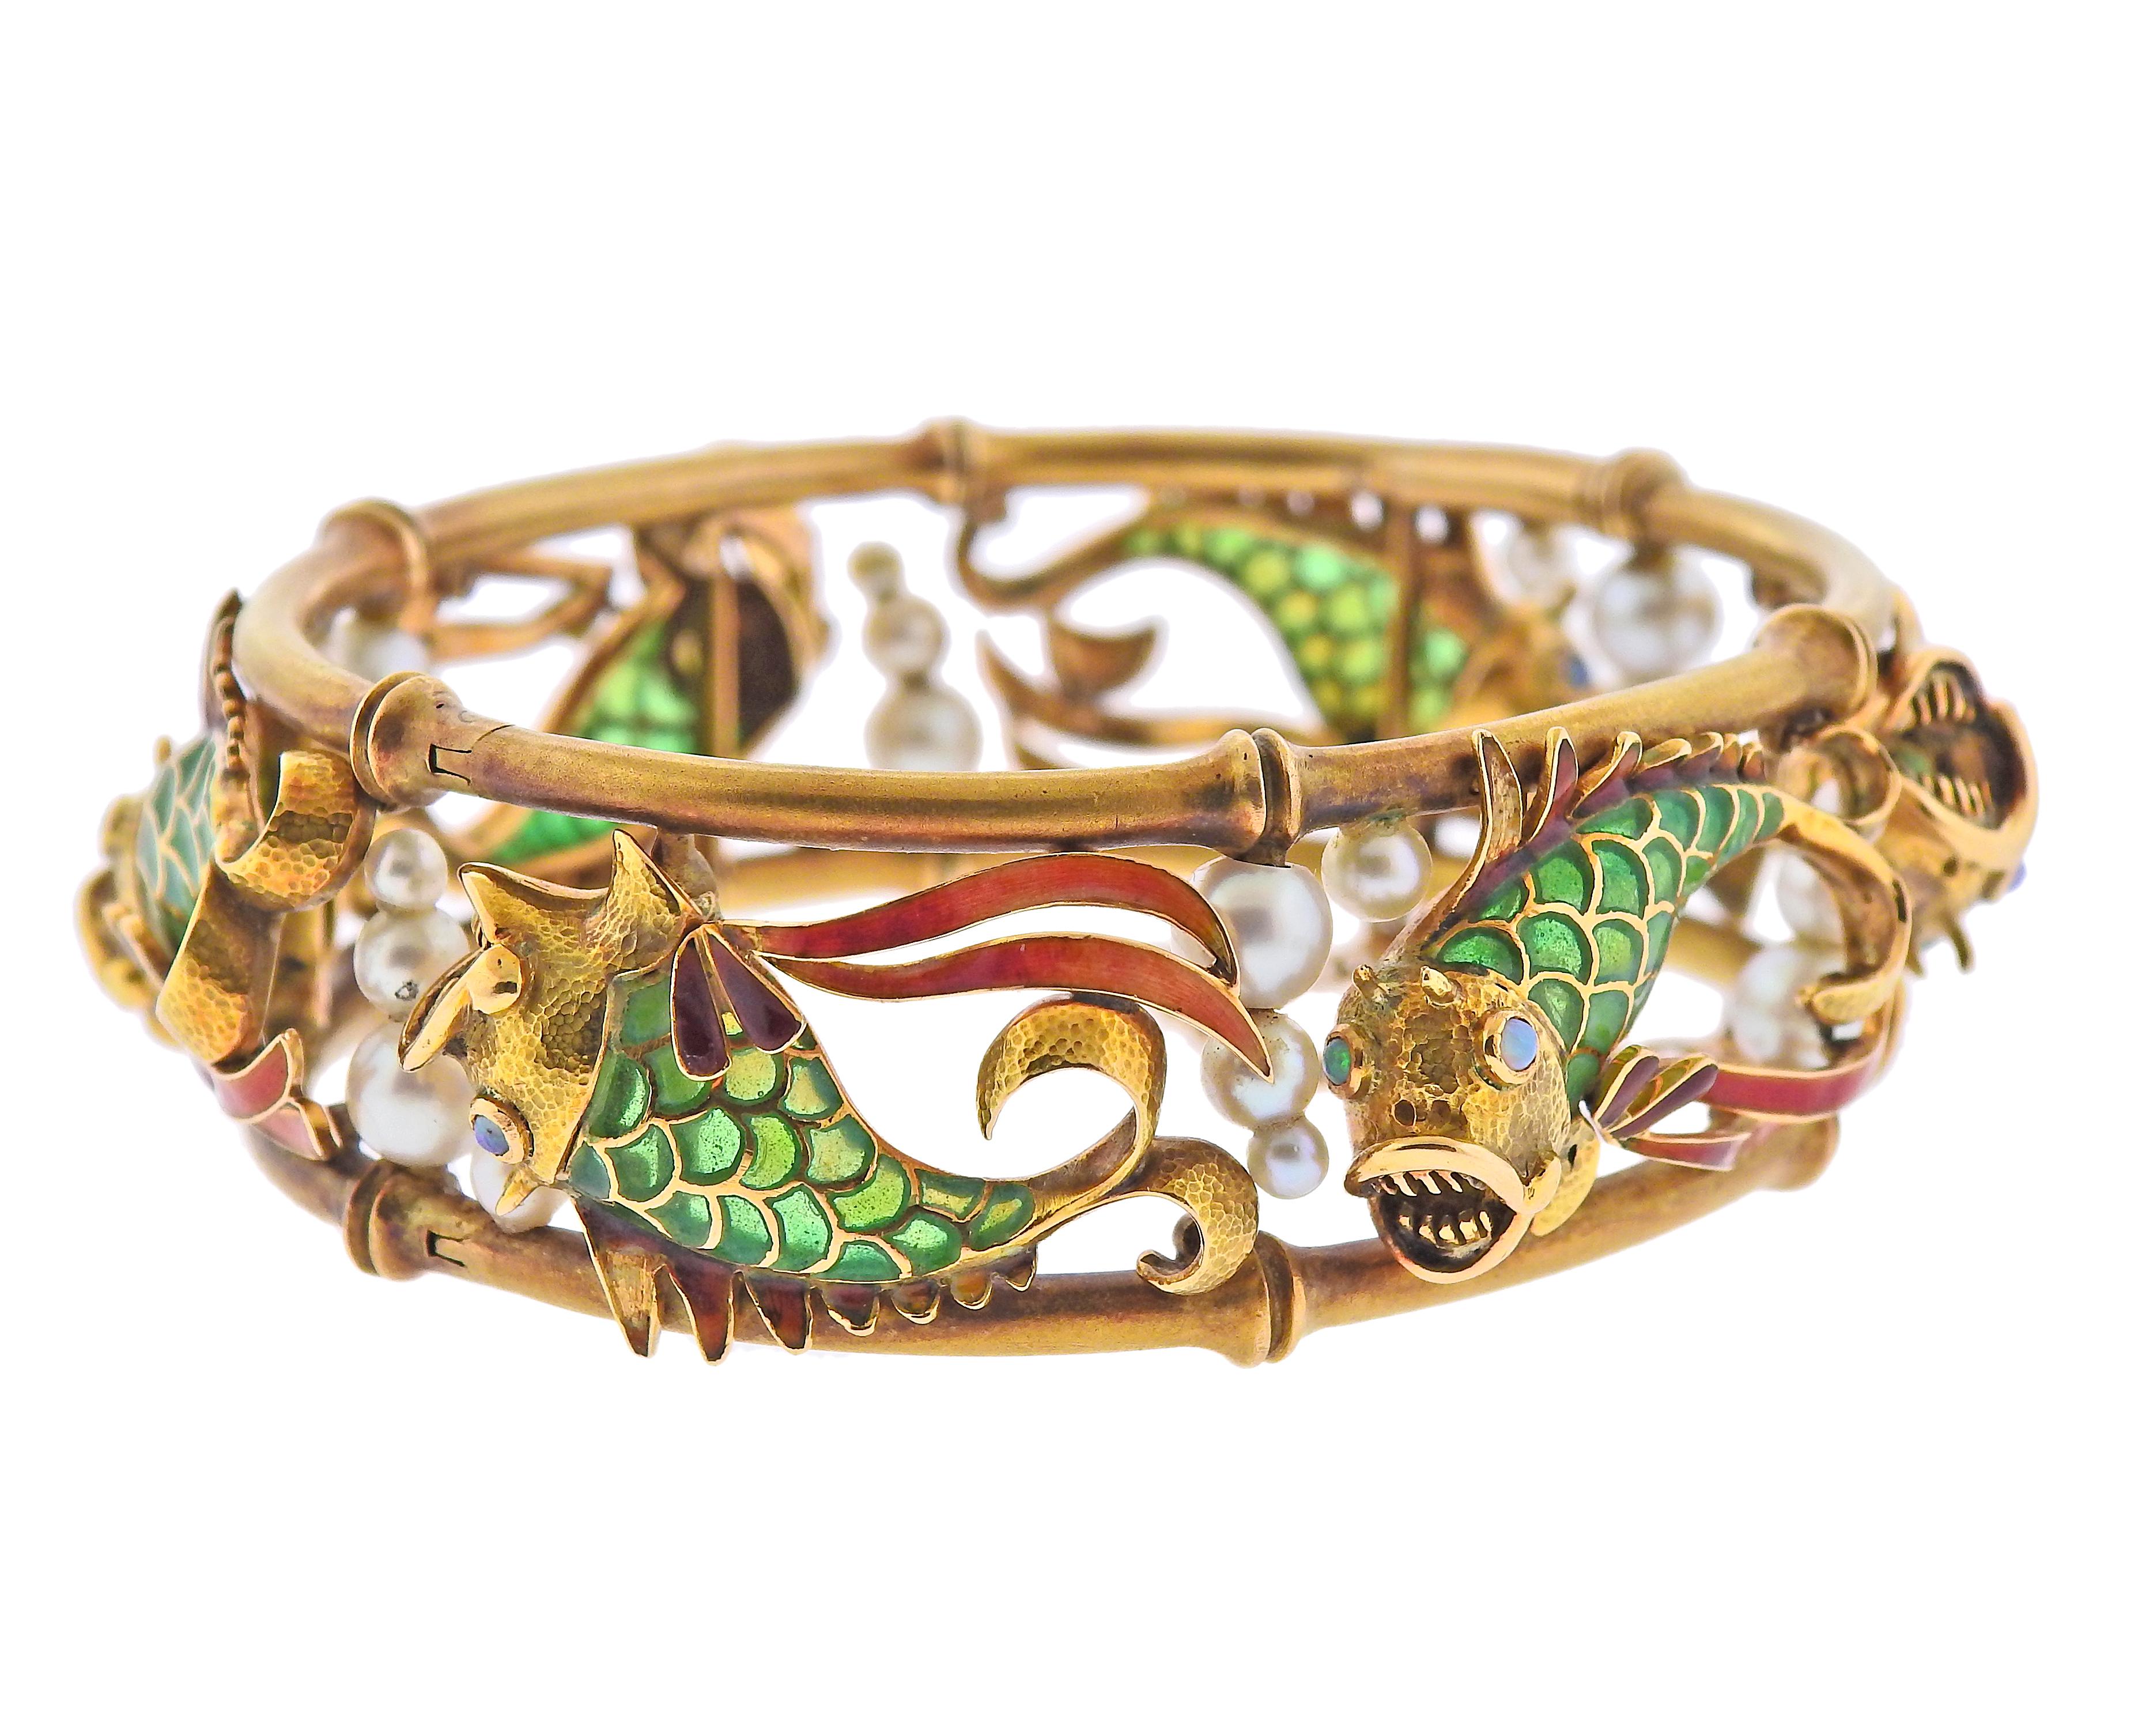 18k gold bangle bracelet, set with pearls, opals and Plique-a-Jour enamel, featuring fish.  Bracelet will fit approx. 7